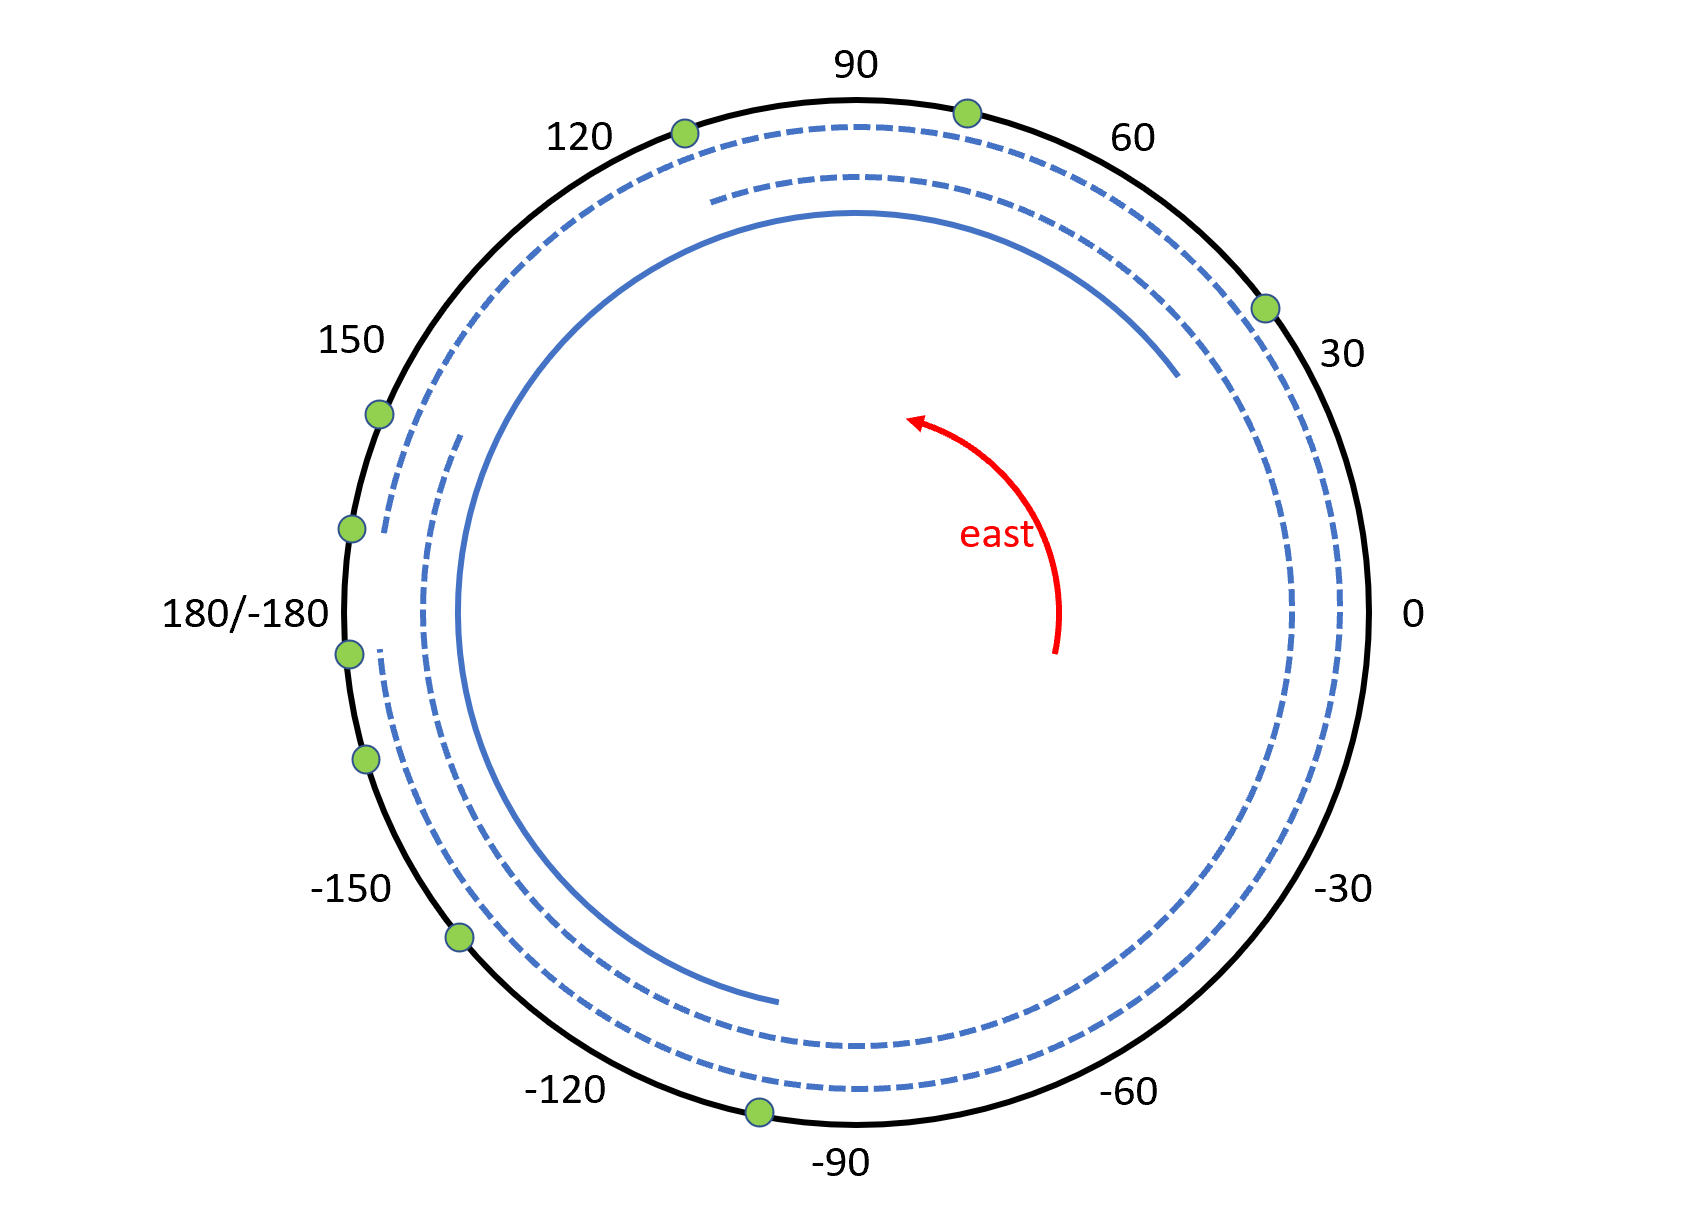 a circle with points at -185, -165, -140, -100, 35, 80, 110, 160, and 170 degrees; wedges [-185,170], [160,110],
and [35,-100] containing all points; the [35,-100] wedge is the smallest
such wedge